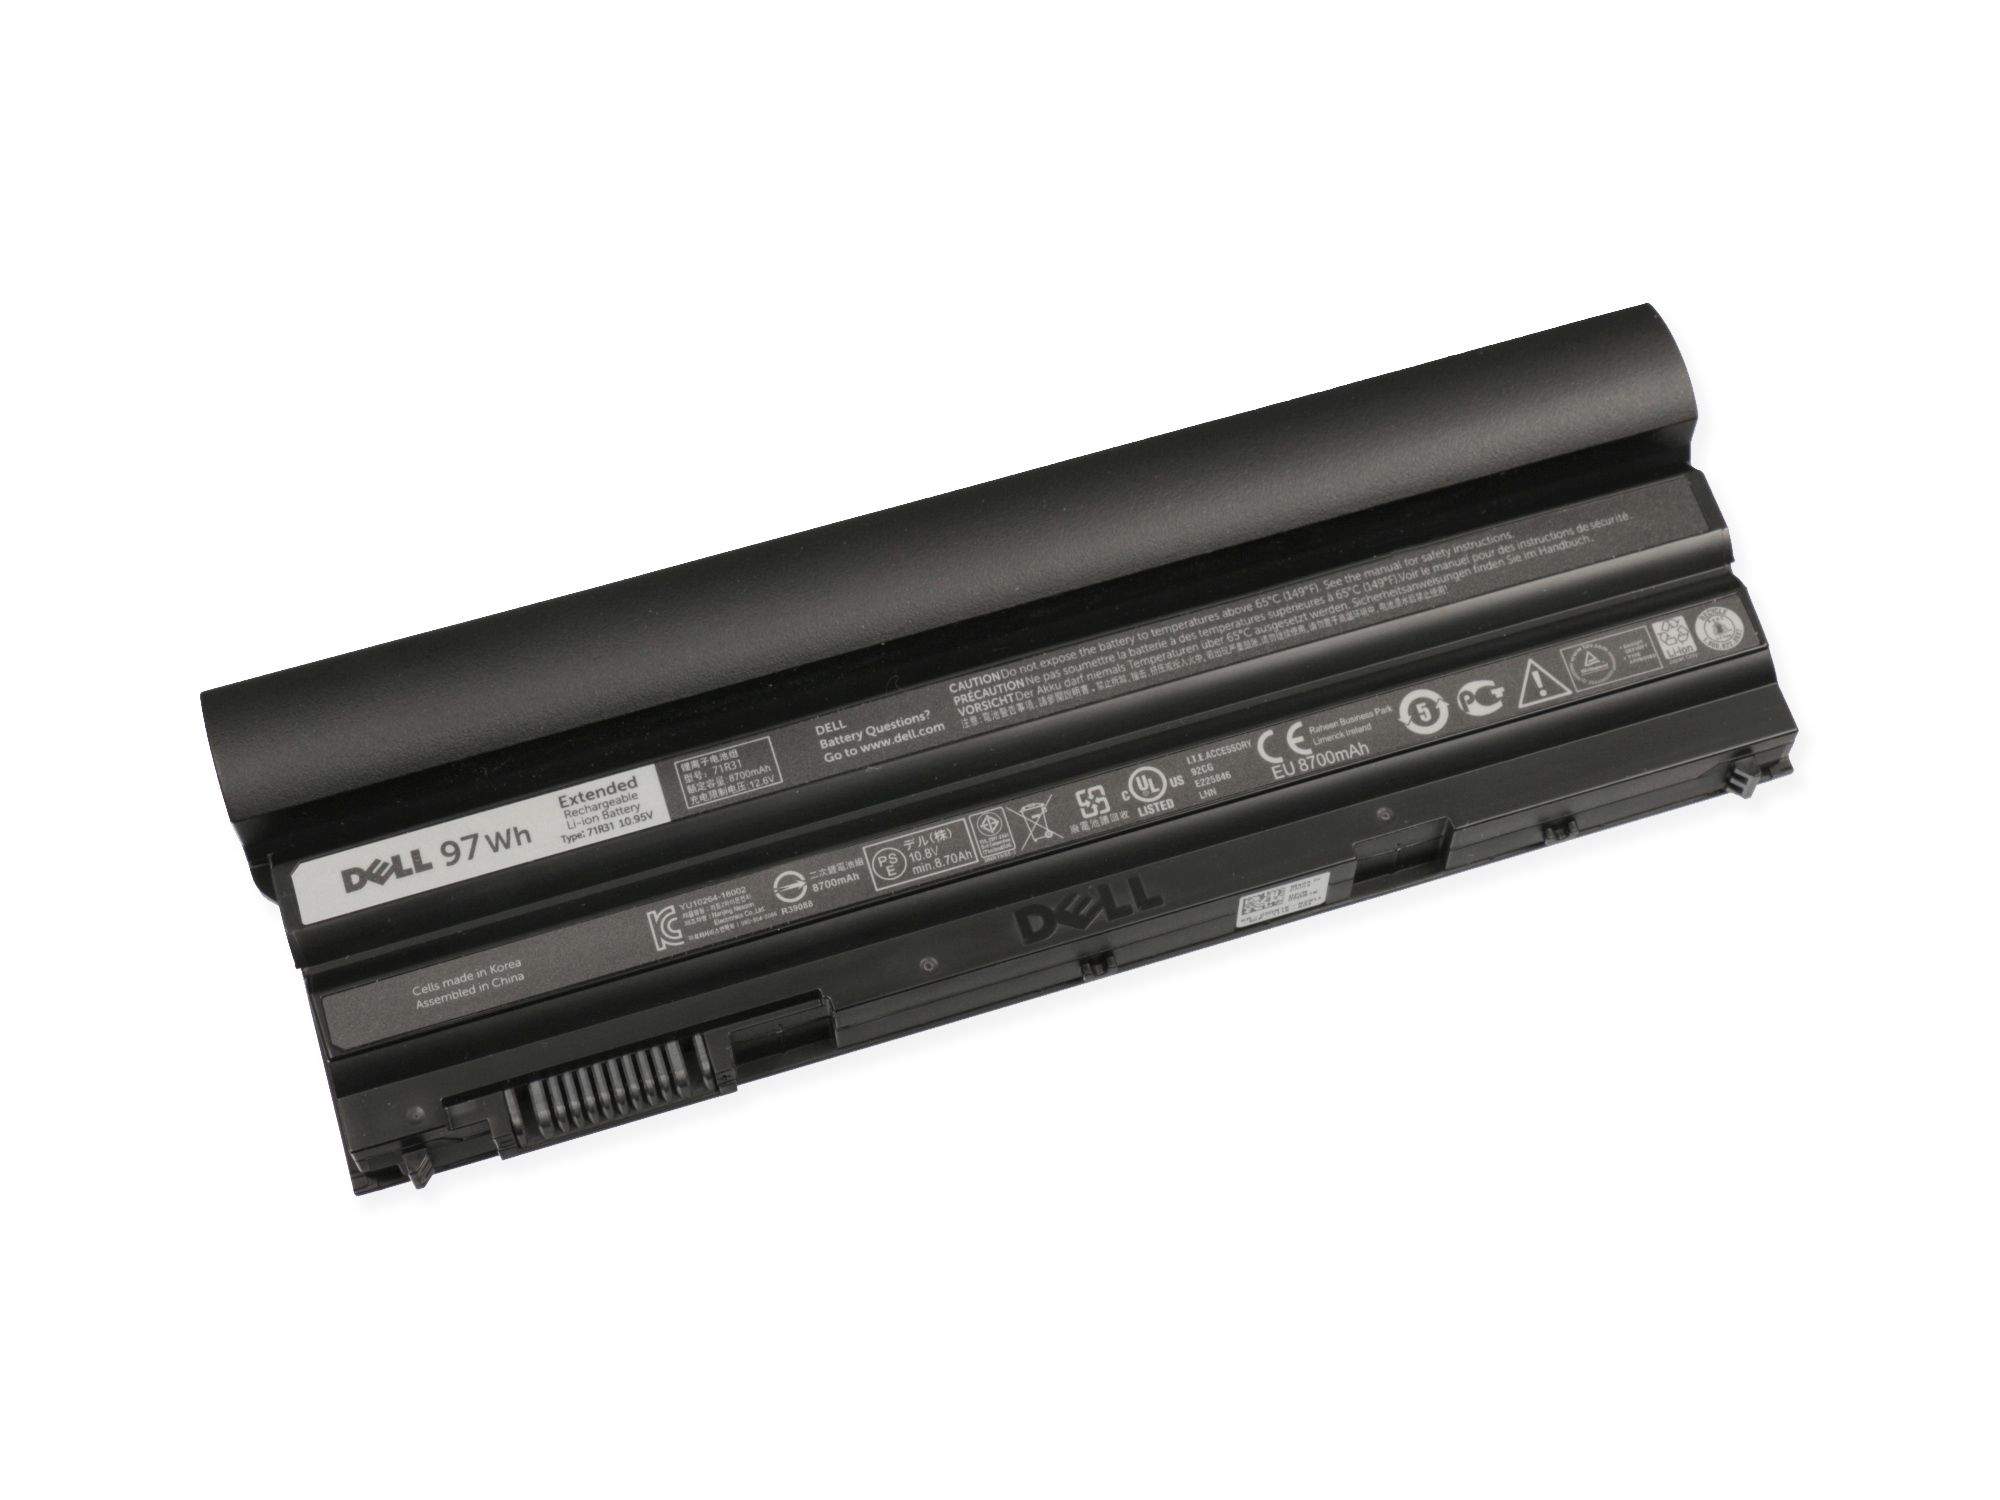 DELL Battery Primary 97WHR 9C